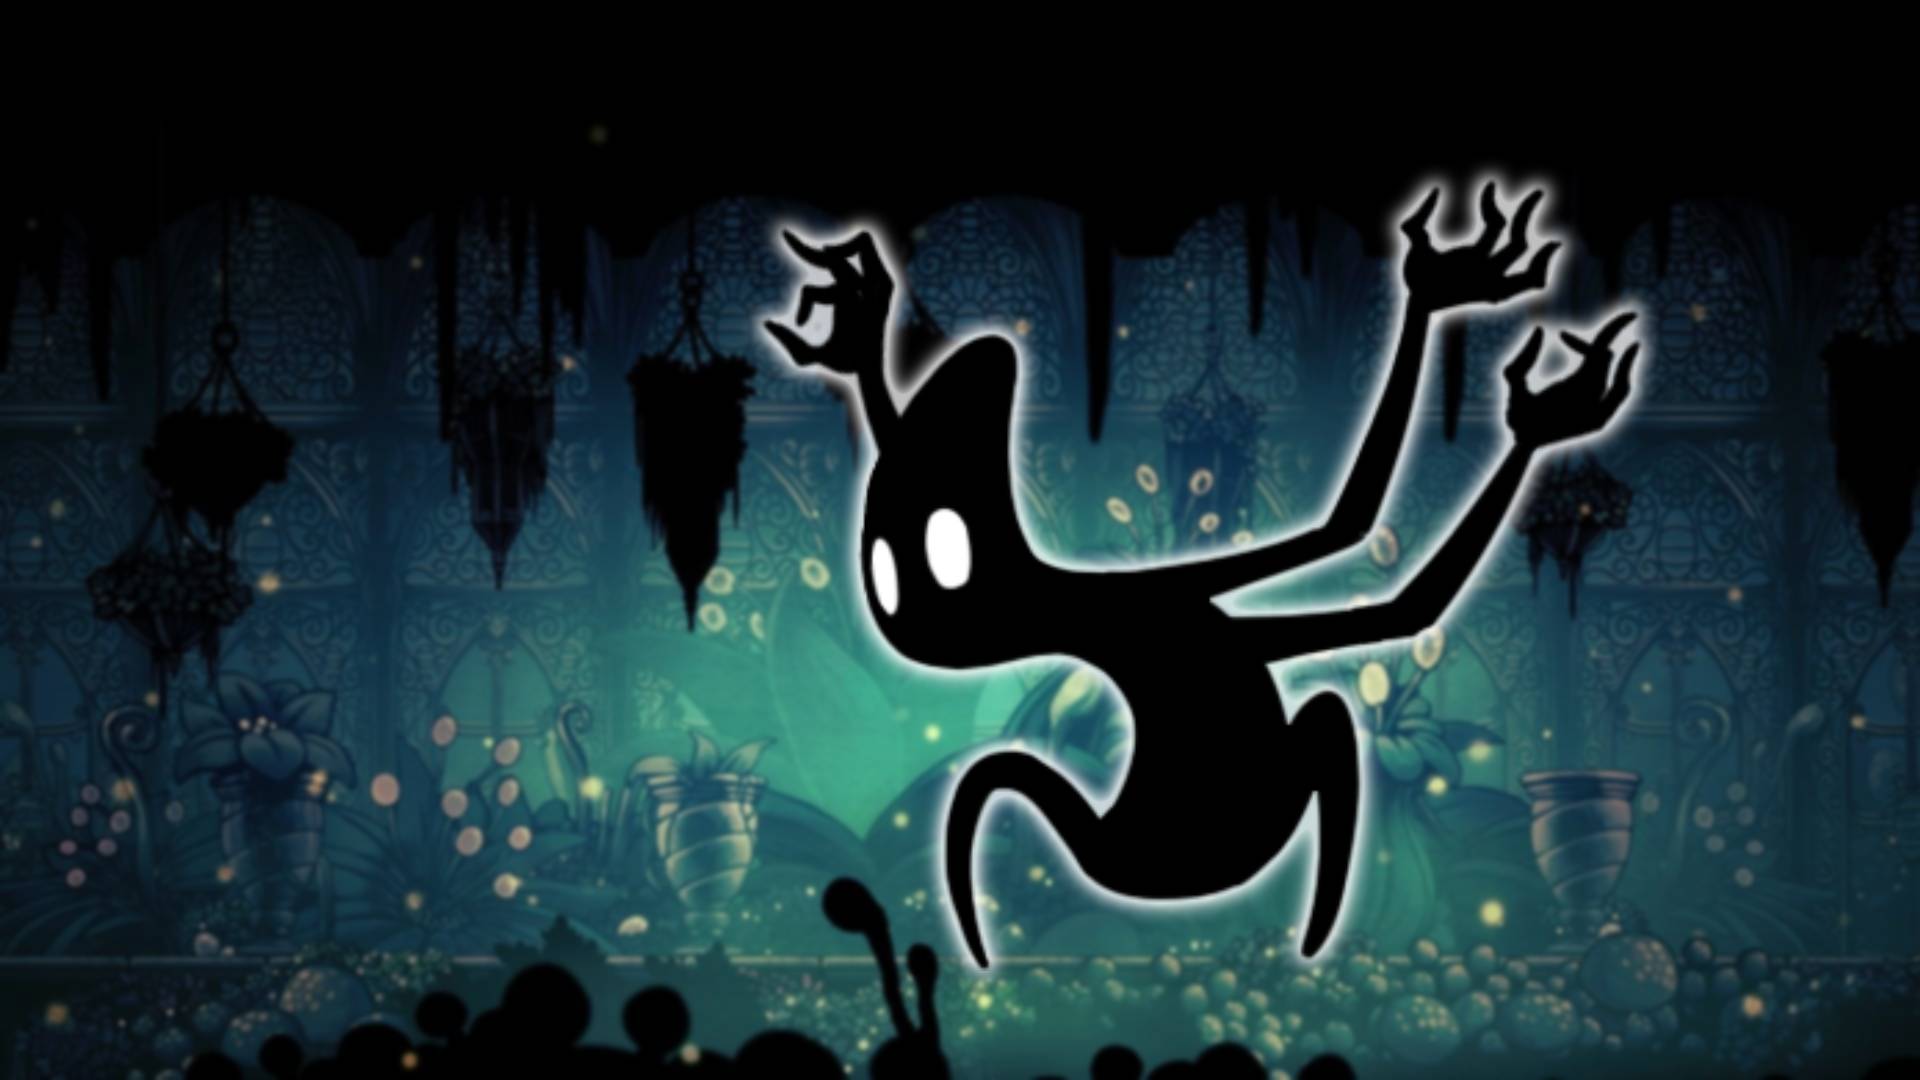 The Collector - the Hollow Knight boss, is visible against a mossy green background area from Hollow Knight 